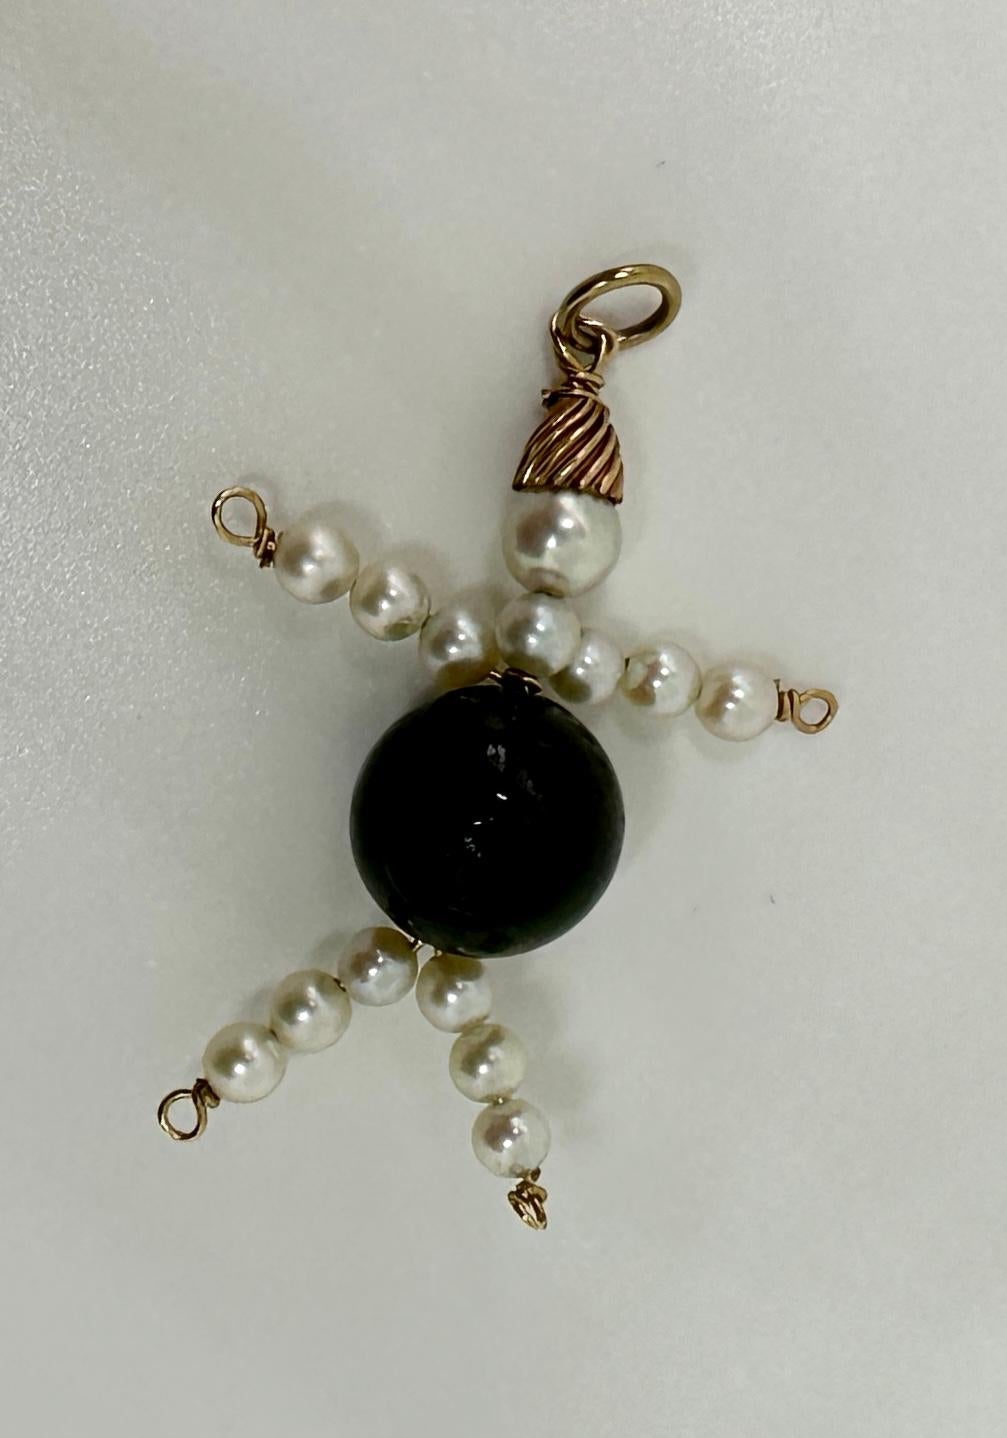 THIS IS A WONDERFUL JEWELED ANTIQUE ART DECO - RETRO PENDANT OR CHARM IN THE FORM OF A LADY OR MAN WITH A HAT IN BLACK ONYX, PEARL AND 14 KARAT GOLD. 
WE ALSO HAVE A ROSE QUARTZ MATCHING PENDANT!  YOU COULD MAKE EARRINGS OF THE TWO!
THE CHARM IS